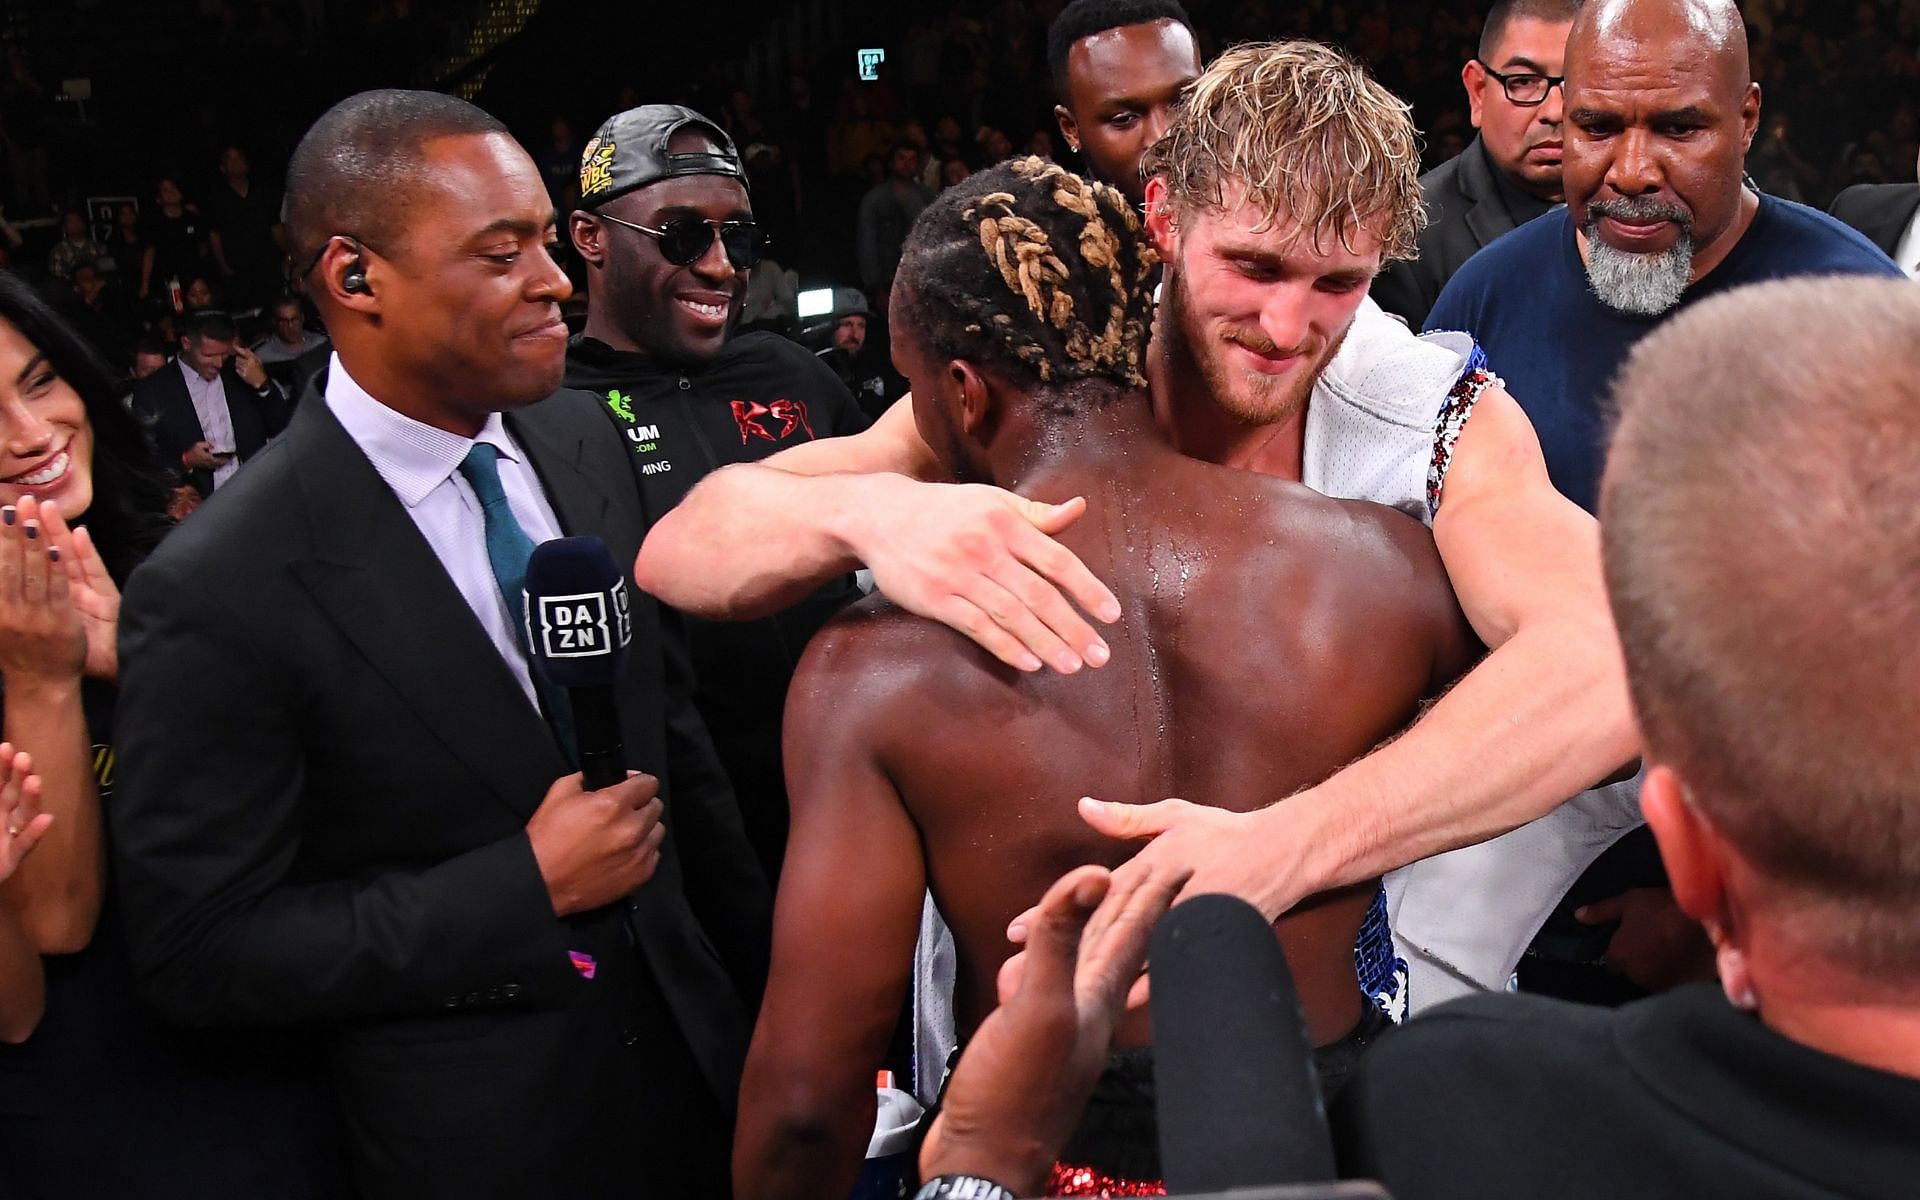 KSI and Logan Paul (center) hug in the ring after their debut professional boxing fight on November 9, 2019, in California